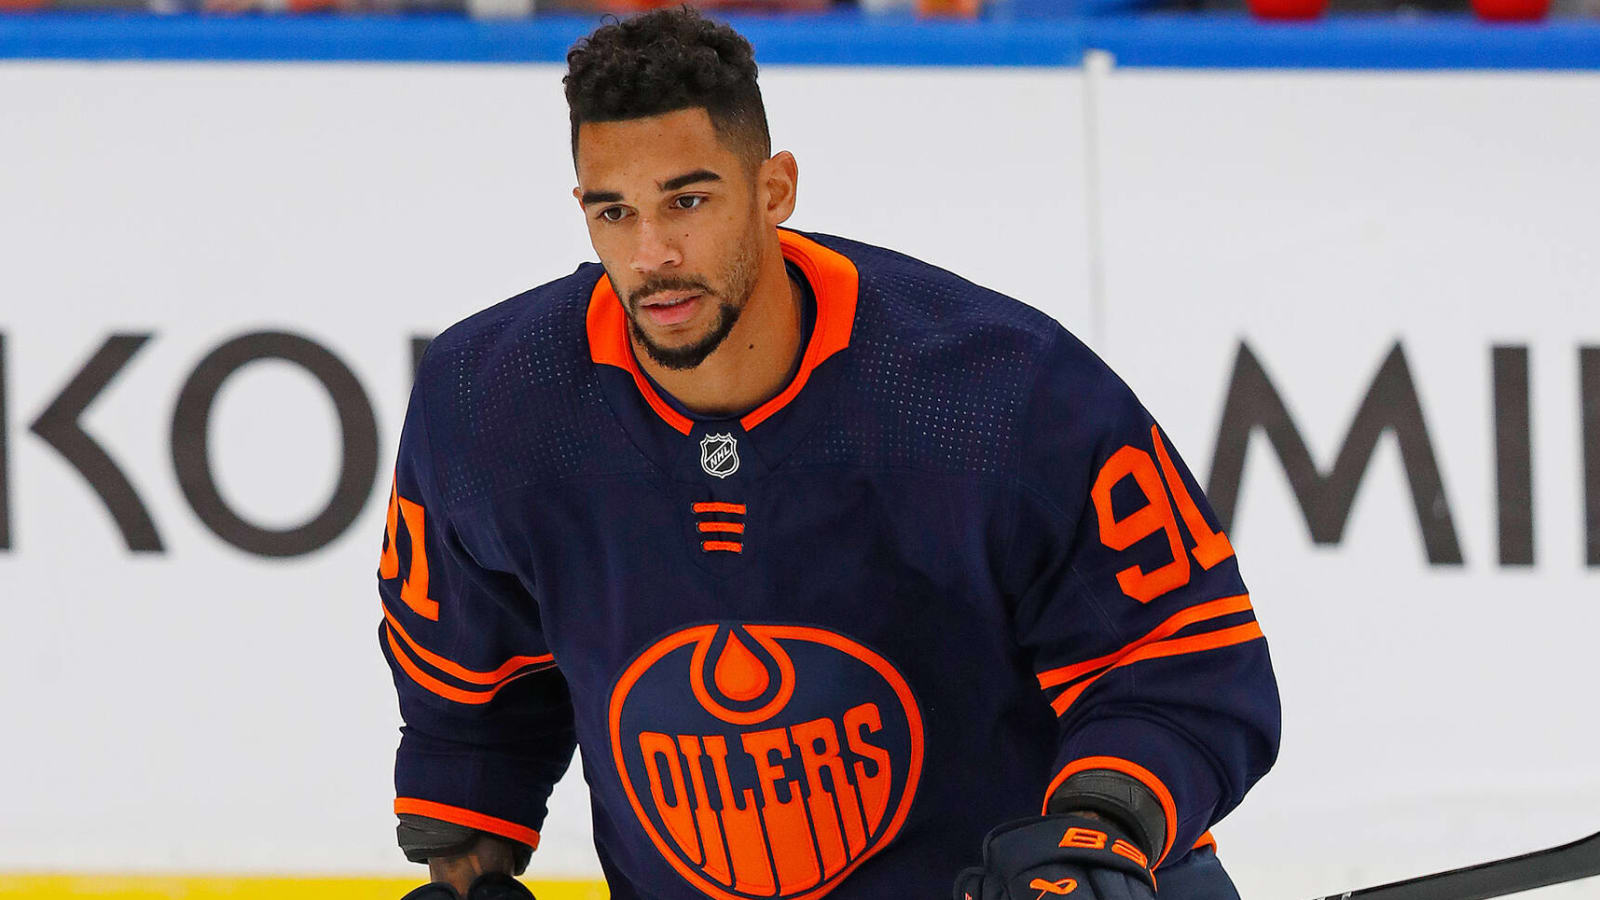 Evander Kane undergoes surgery after being cut by skate